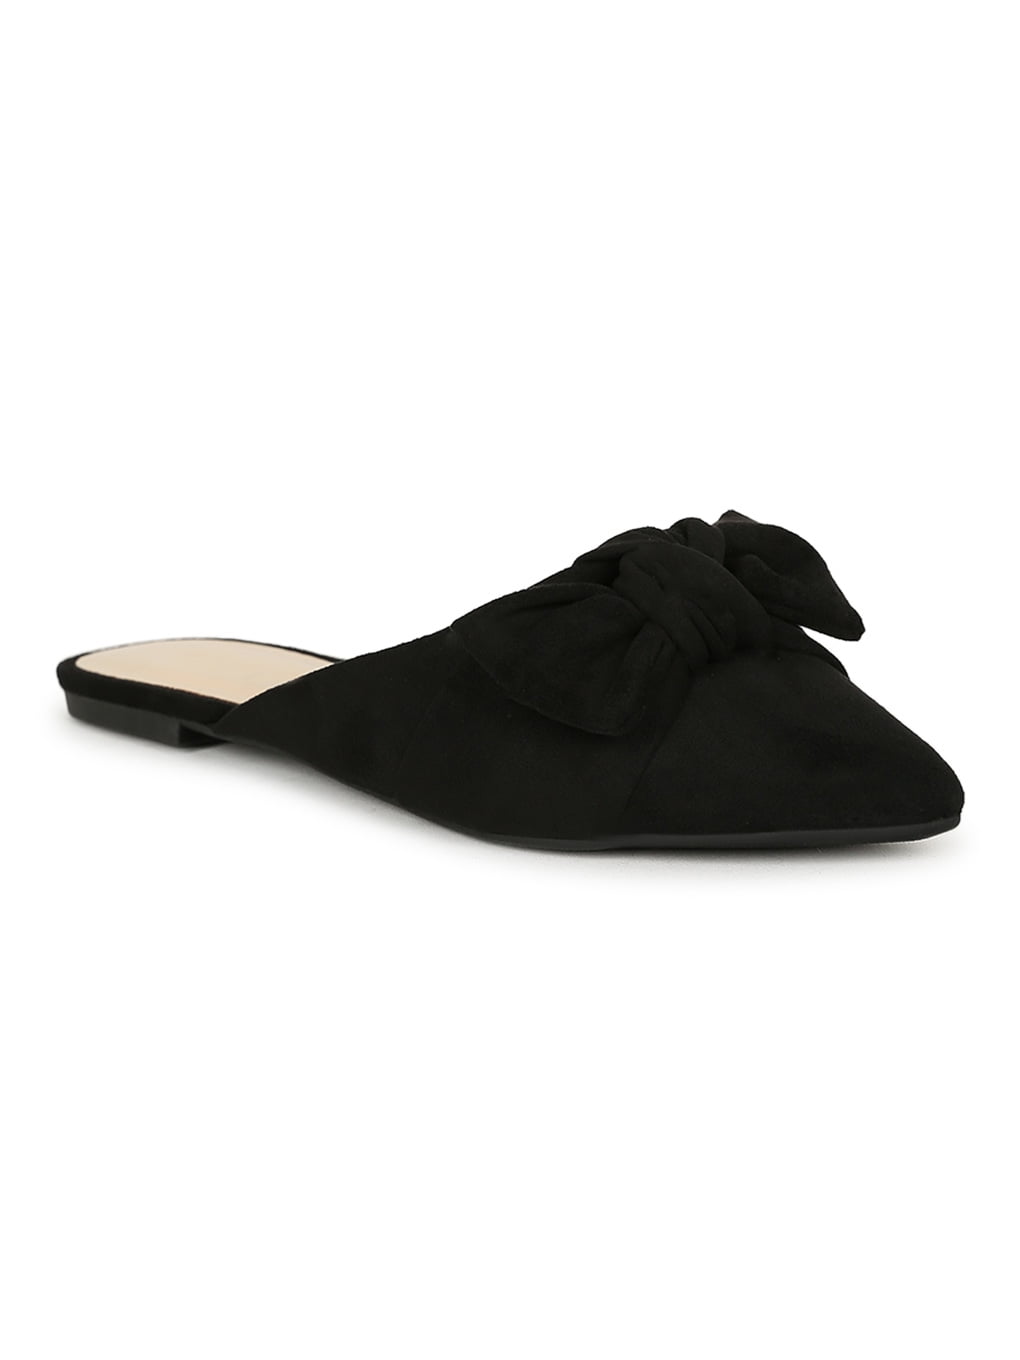 Bamboo Pointy Toe Bow Flat Mule 20086 